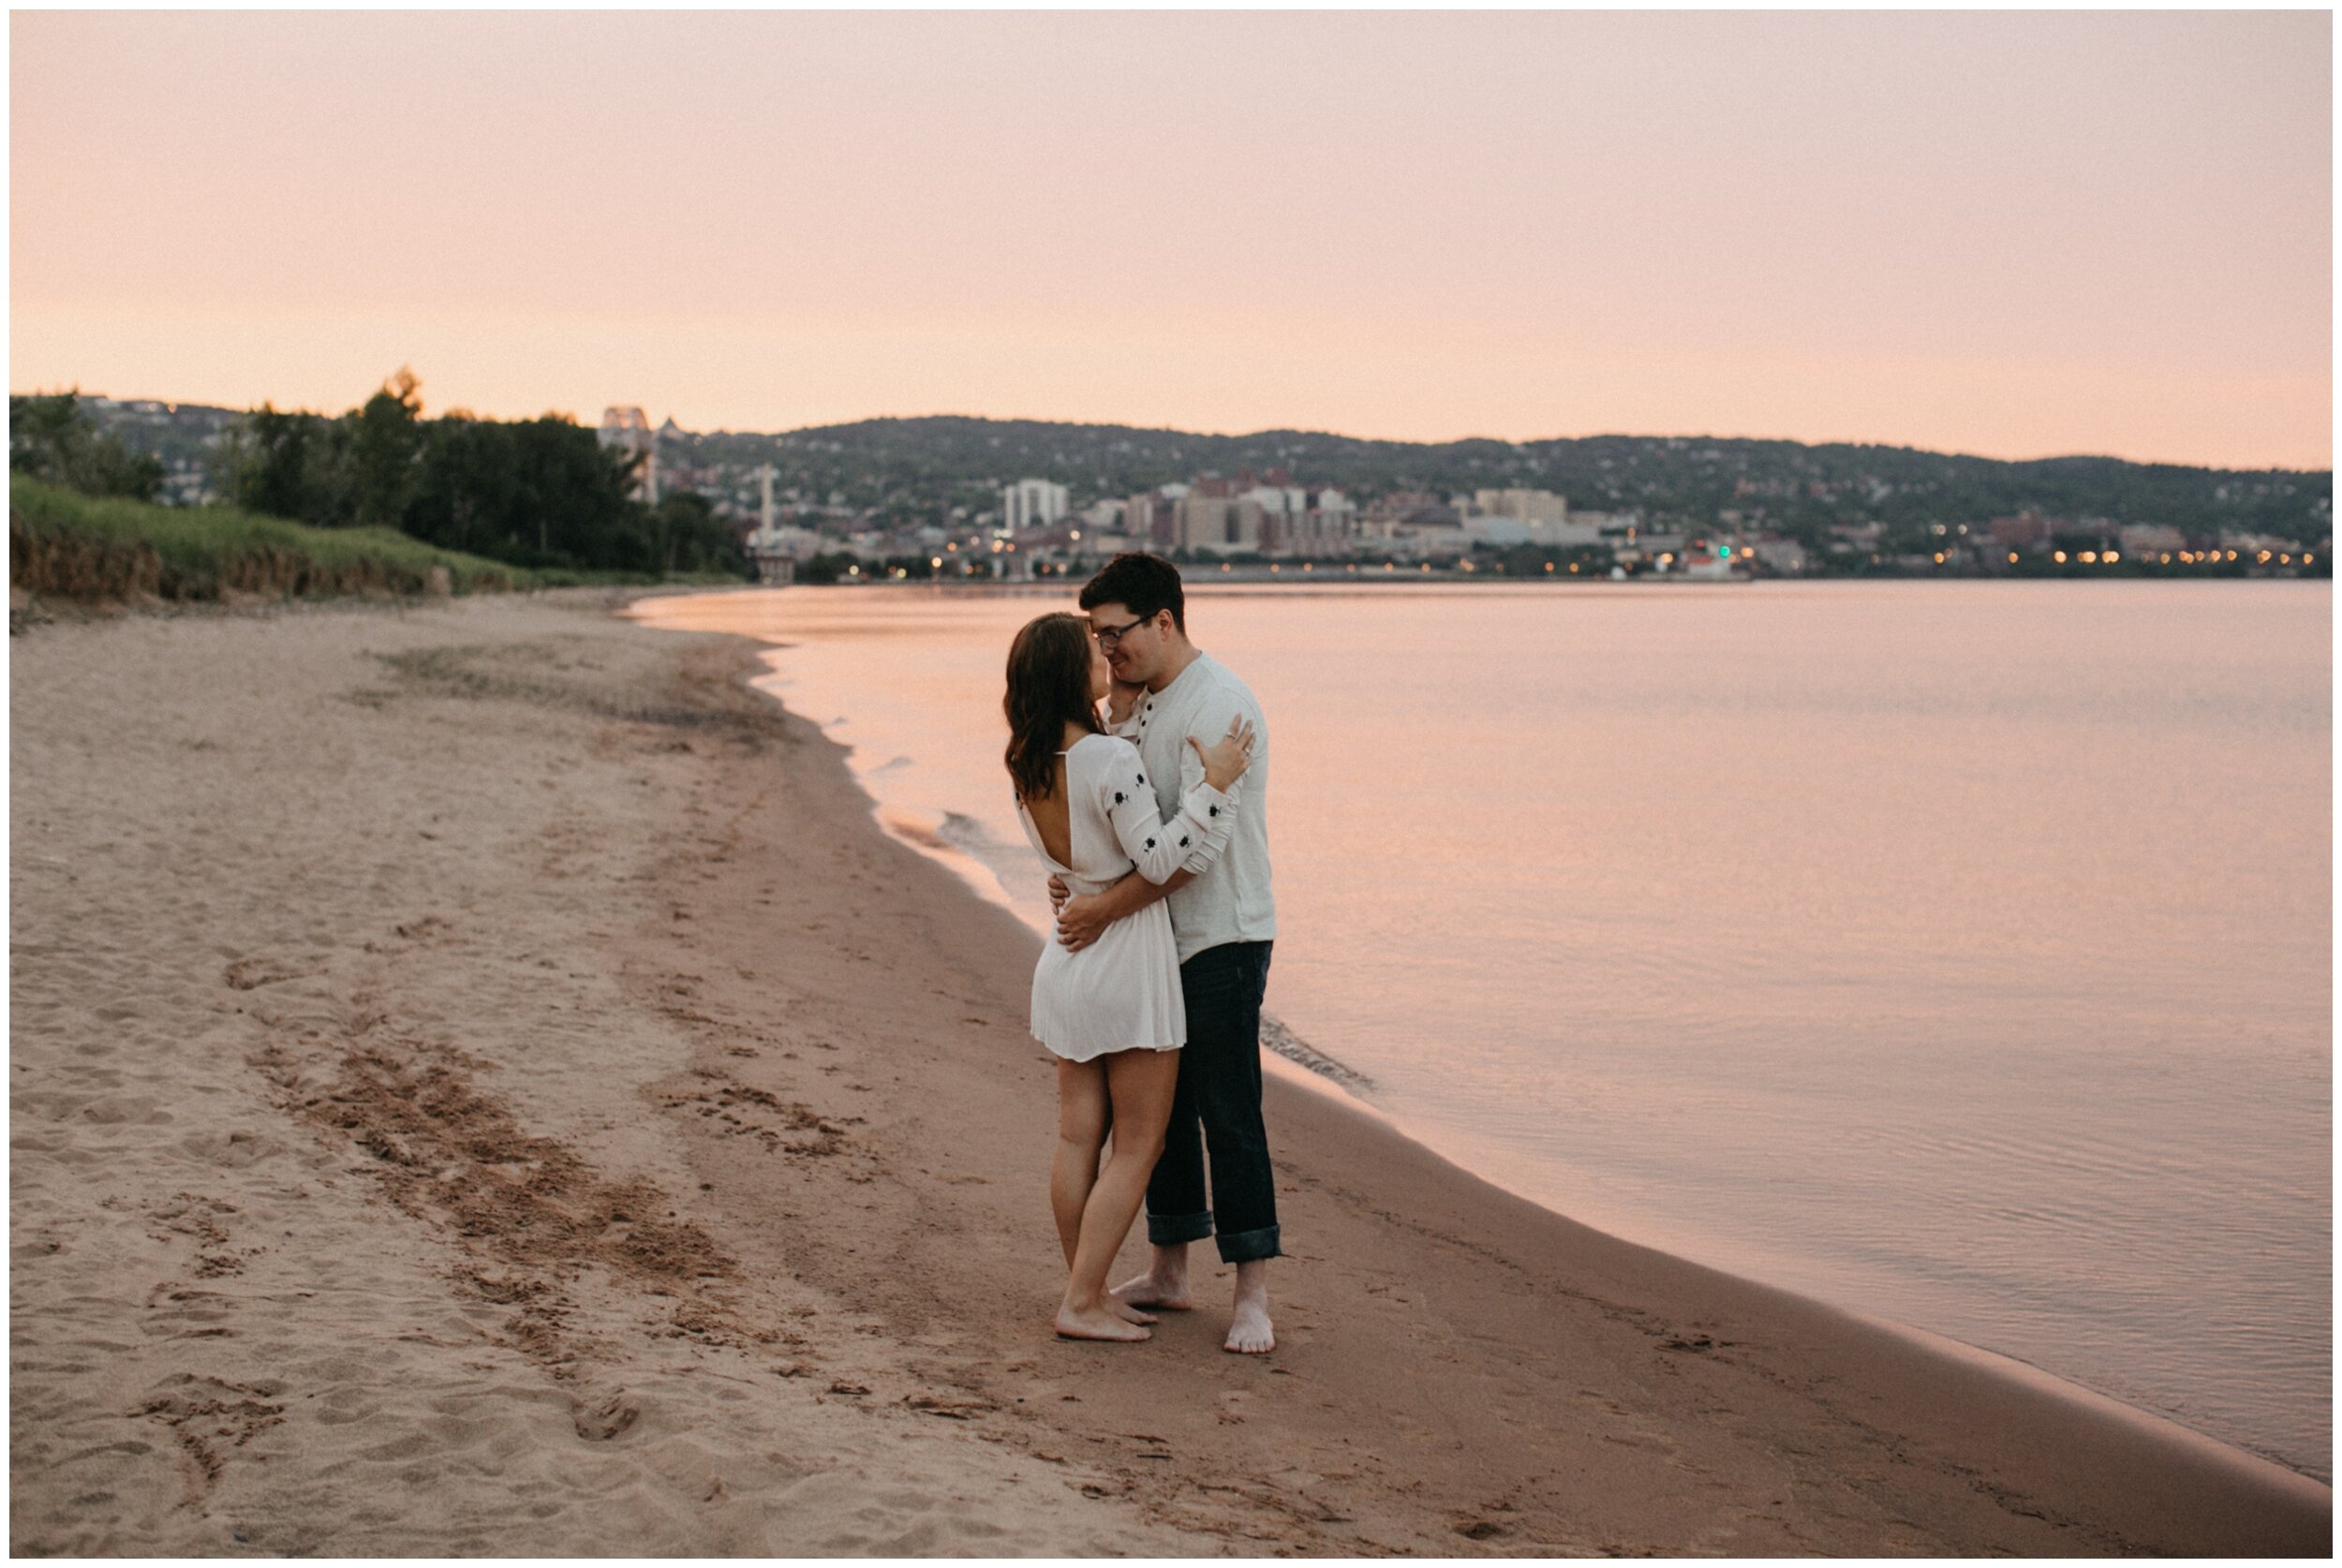 Couple kissing on beach during sunset at Park Point in Duluth, Minnesota